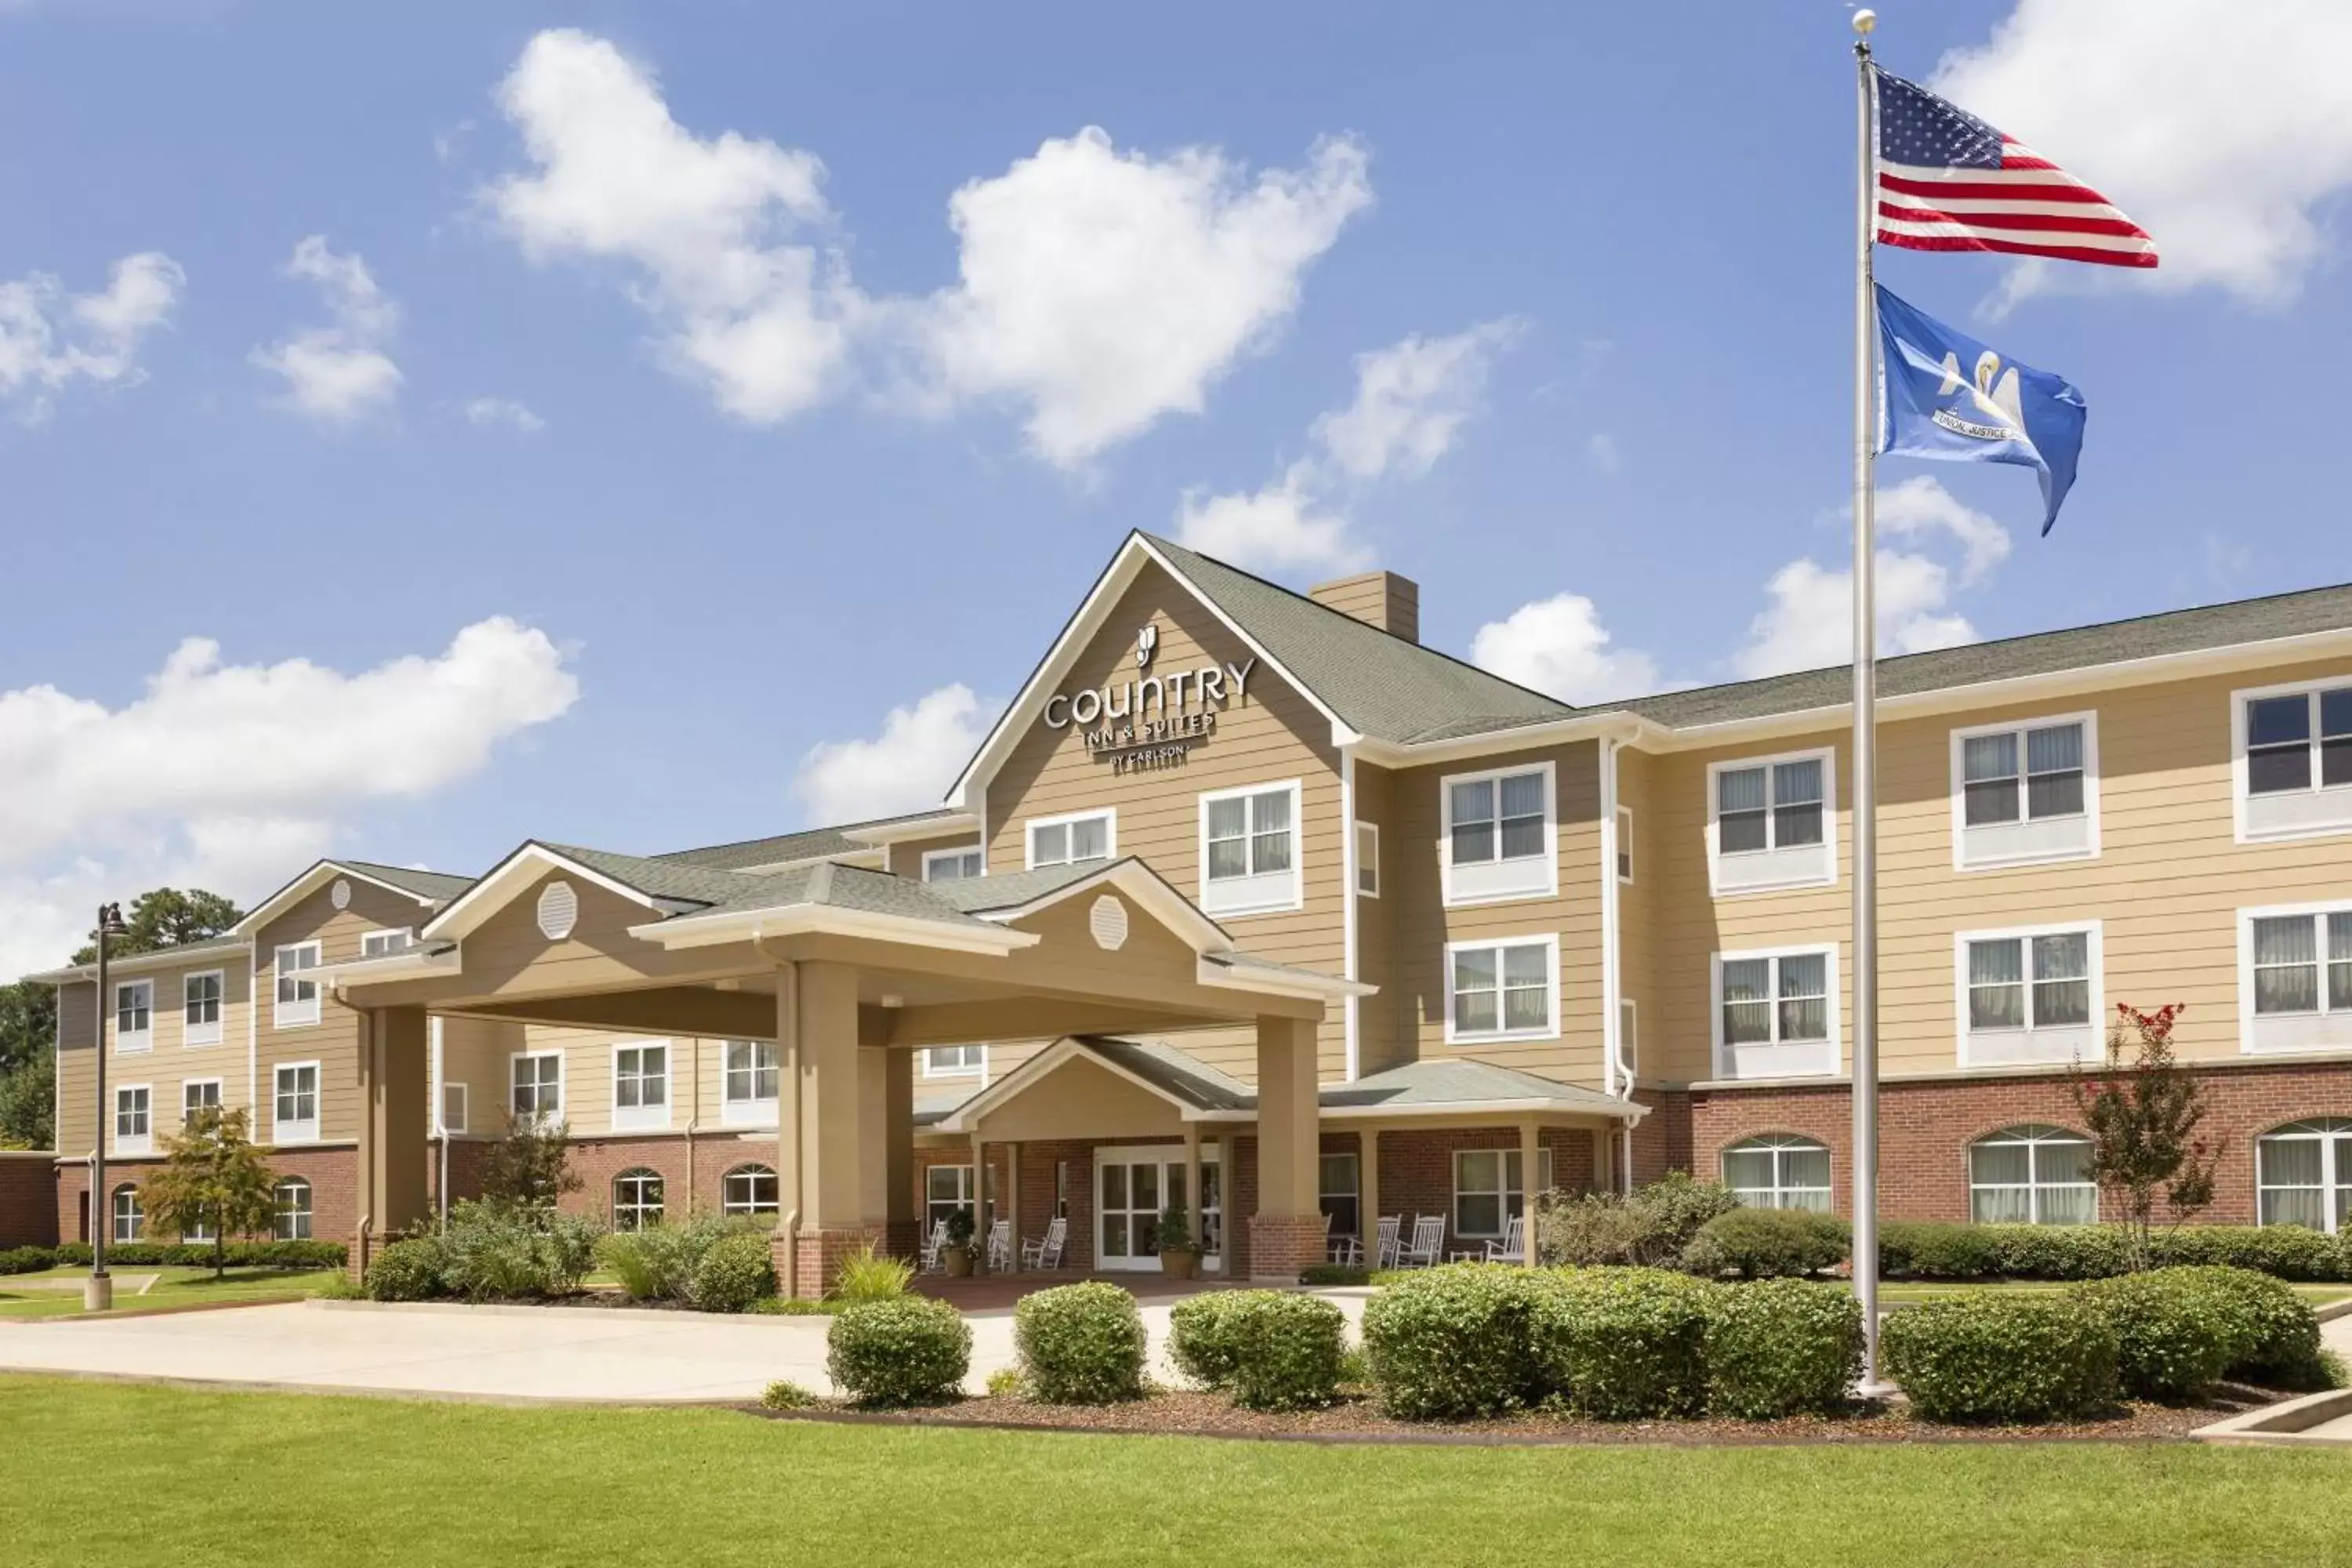 Facade/entrance, Property Building in Country Inn & Suites by Radisson, Pineville, LA